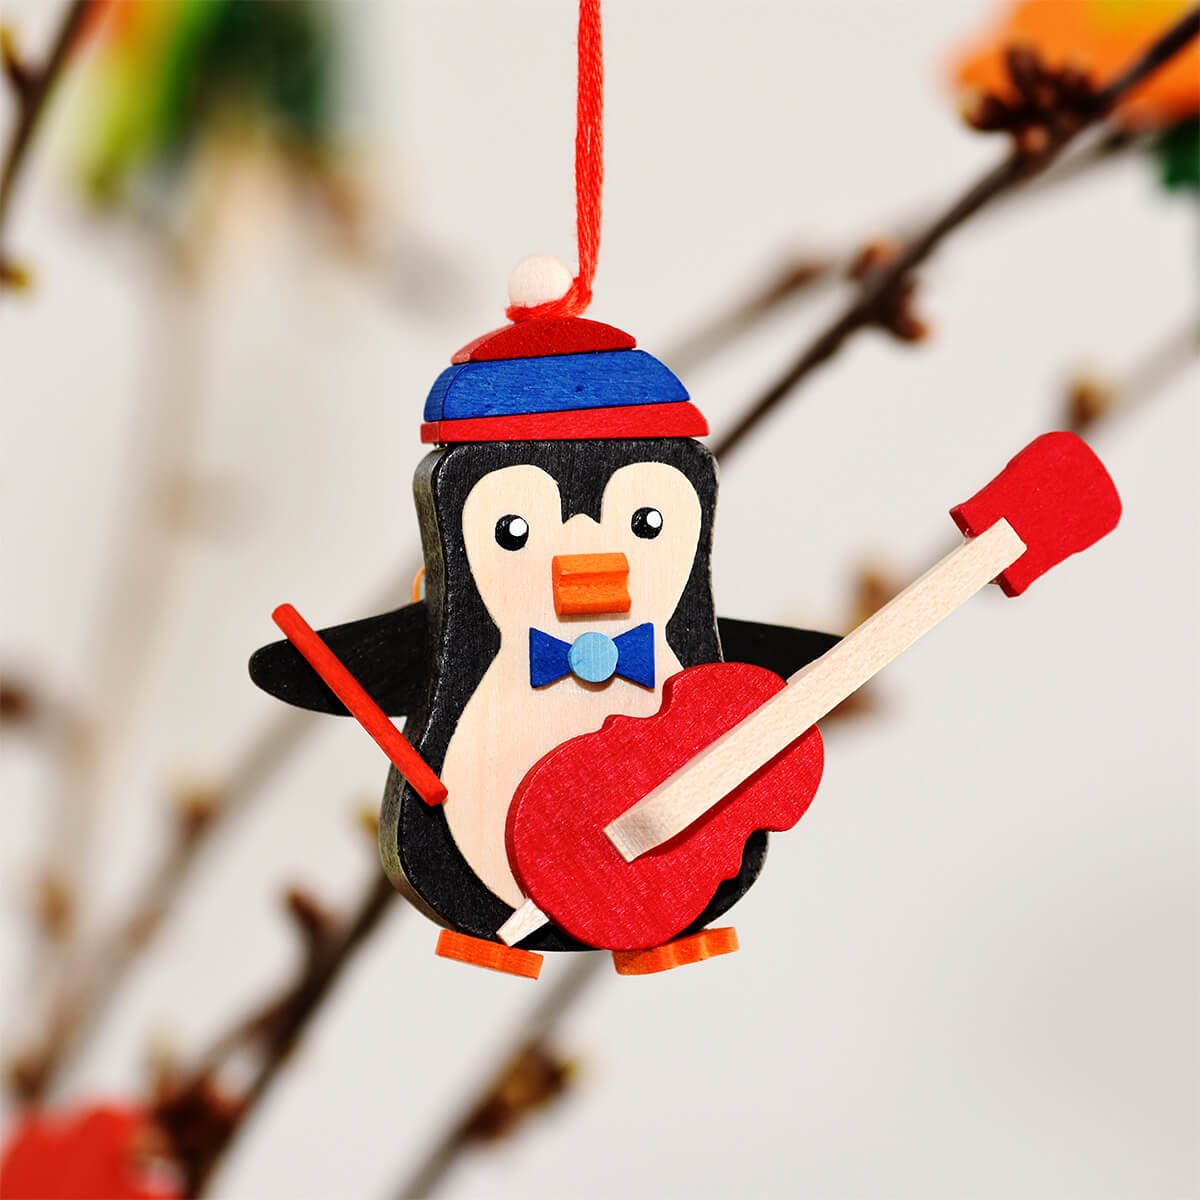 Penguin Ornament with bass